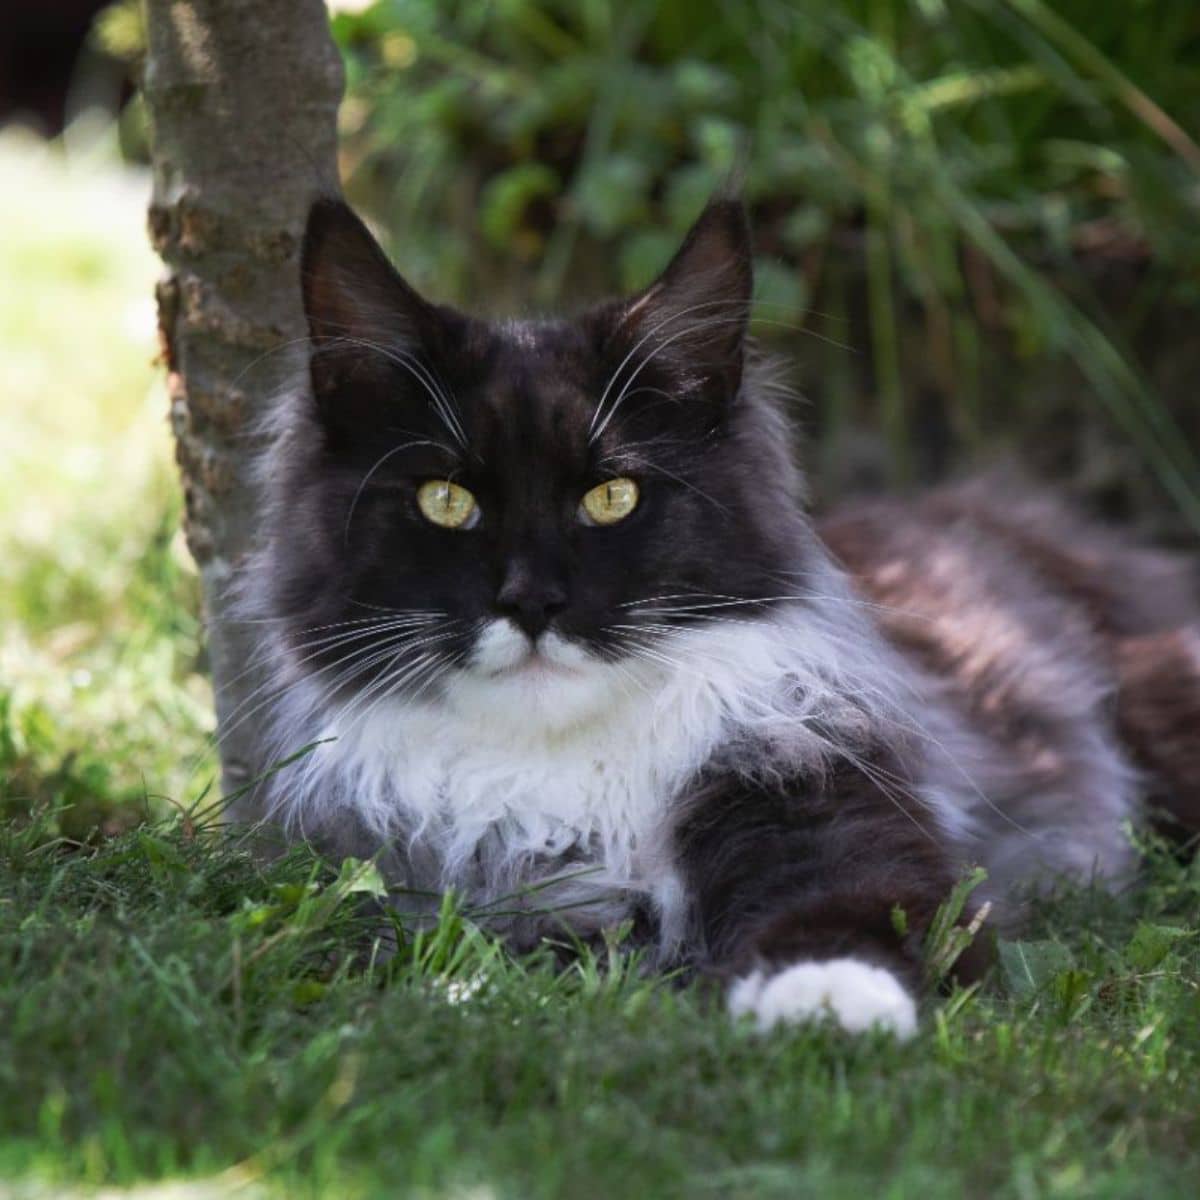 IV. Factors to consider when determining the space requirements for Maine Coons